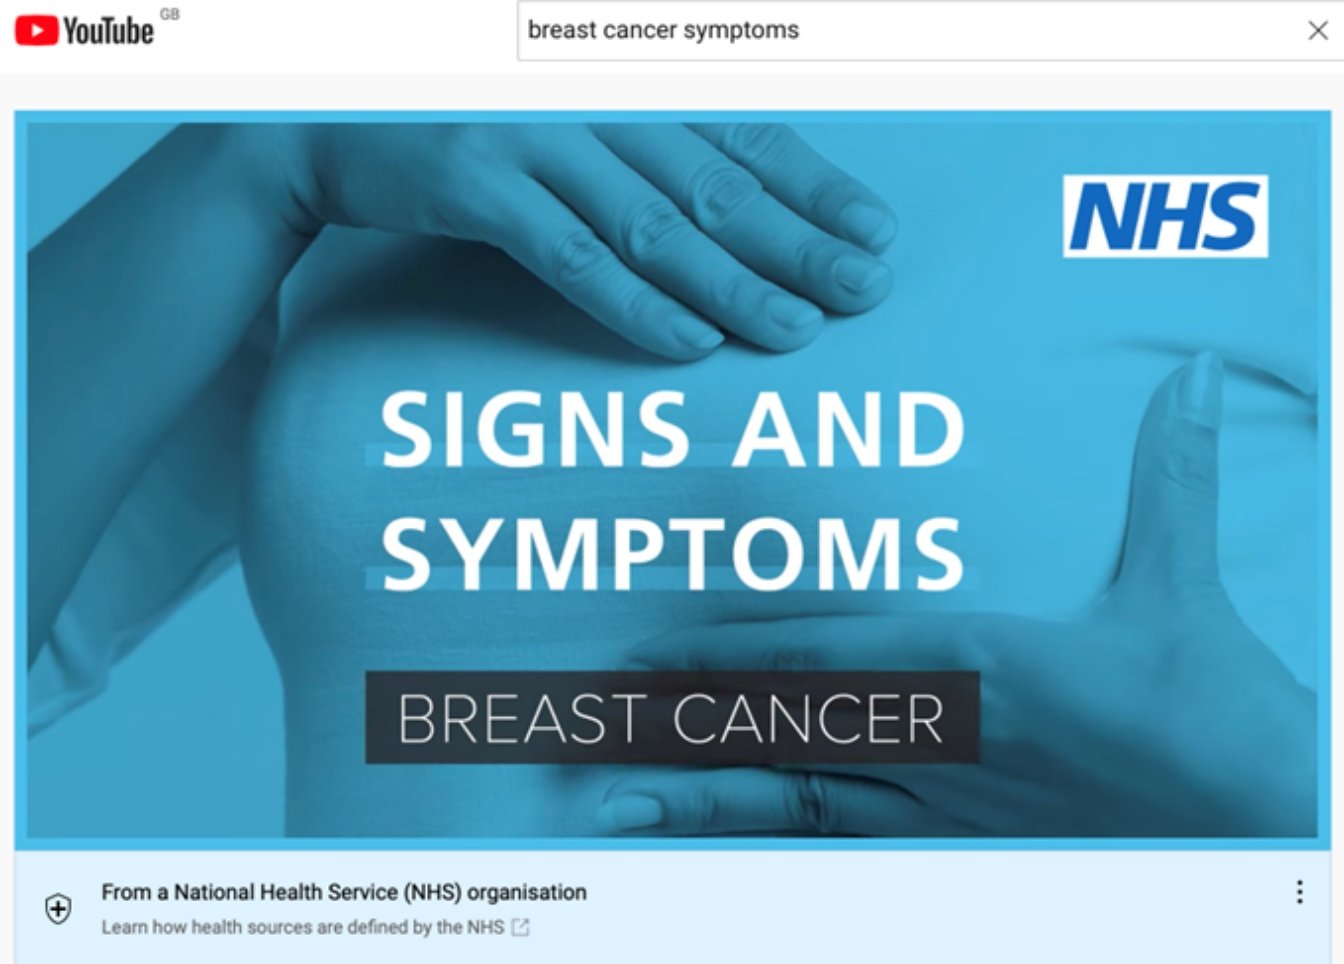 A video about breast cancer on YouTube with an information panel that says the video is from an NHS organisation.